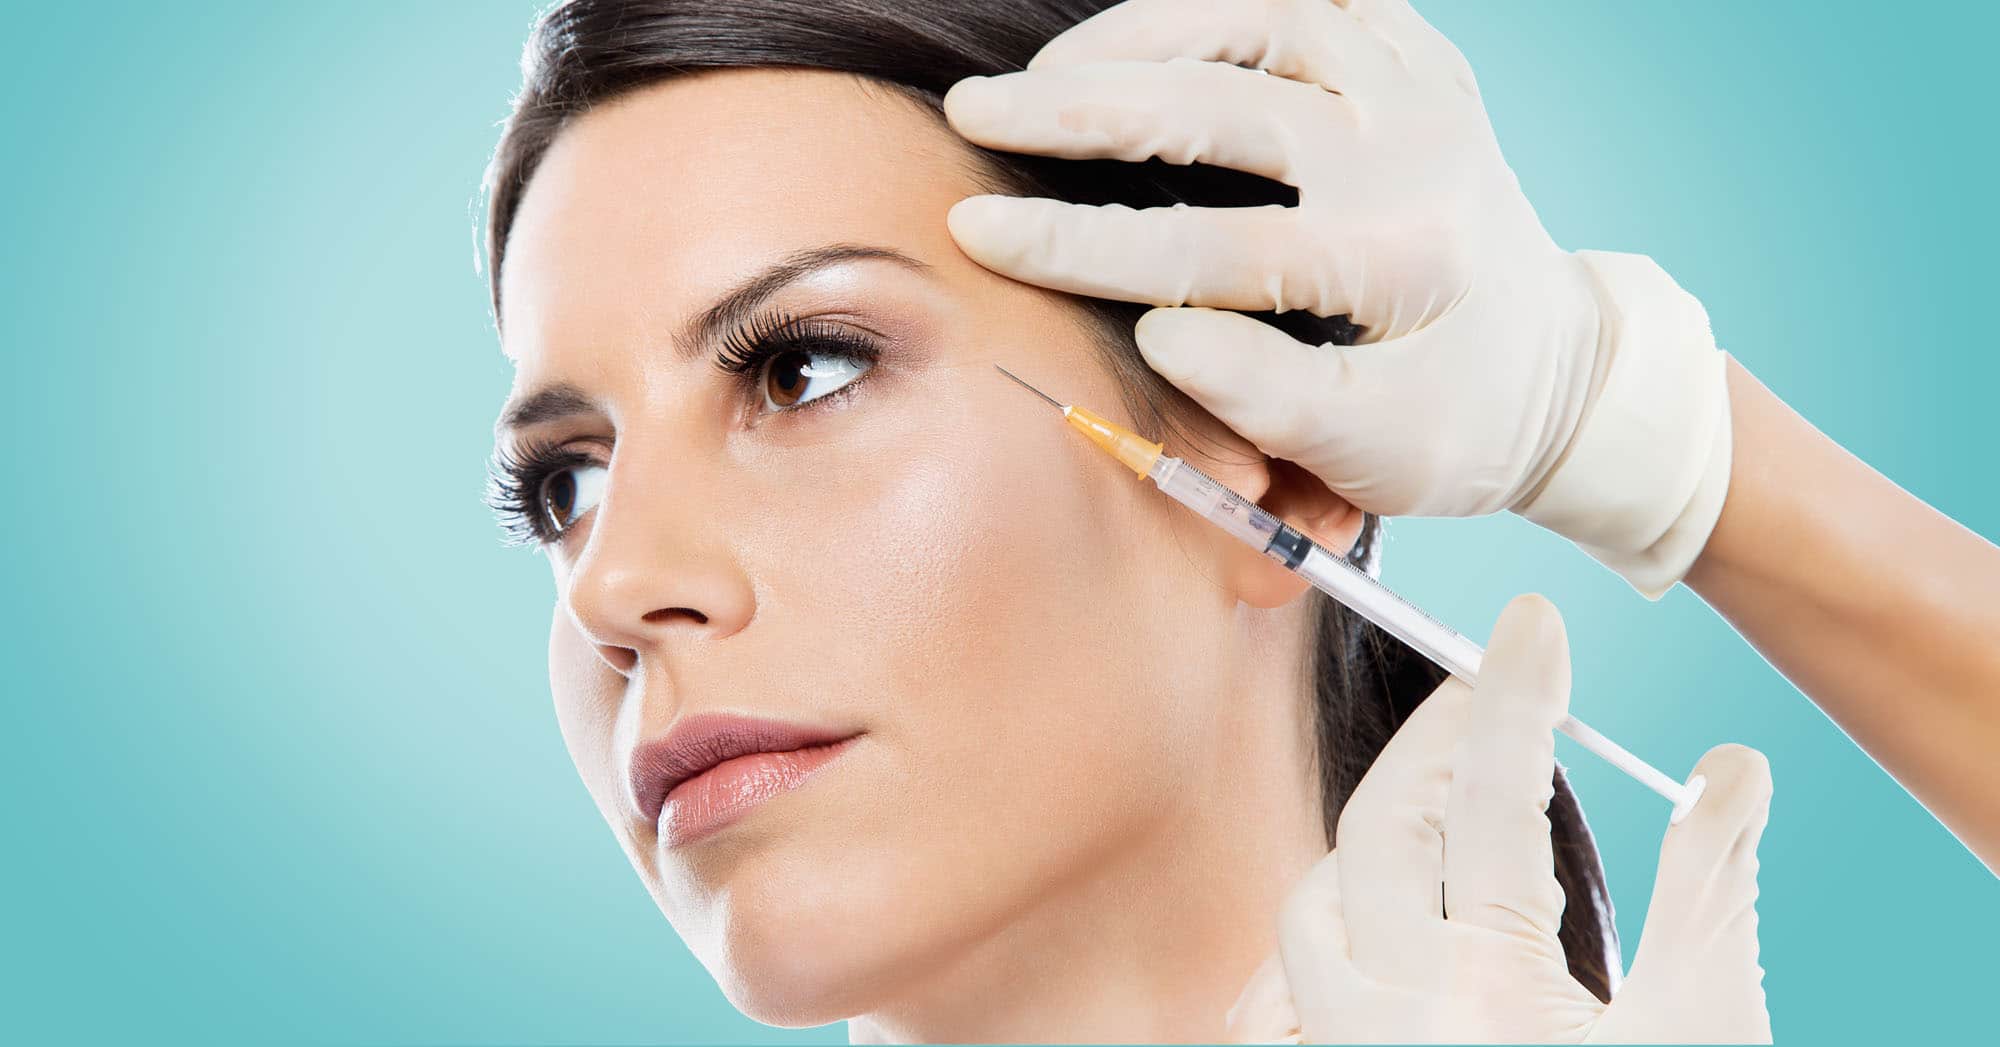 botox new york - Where You Can Get Fillers or Botox Done in New York City